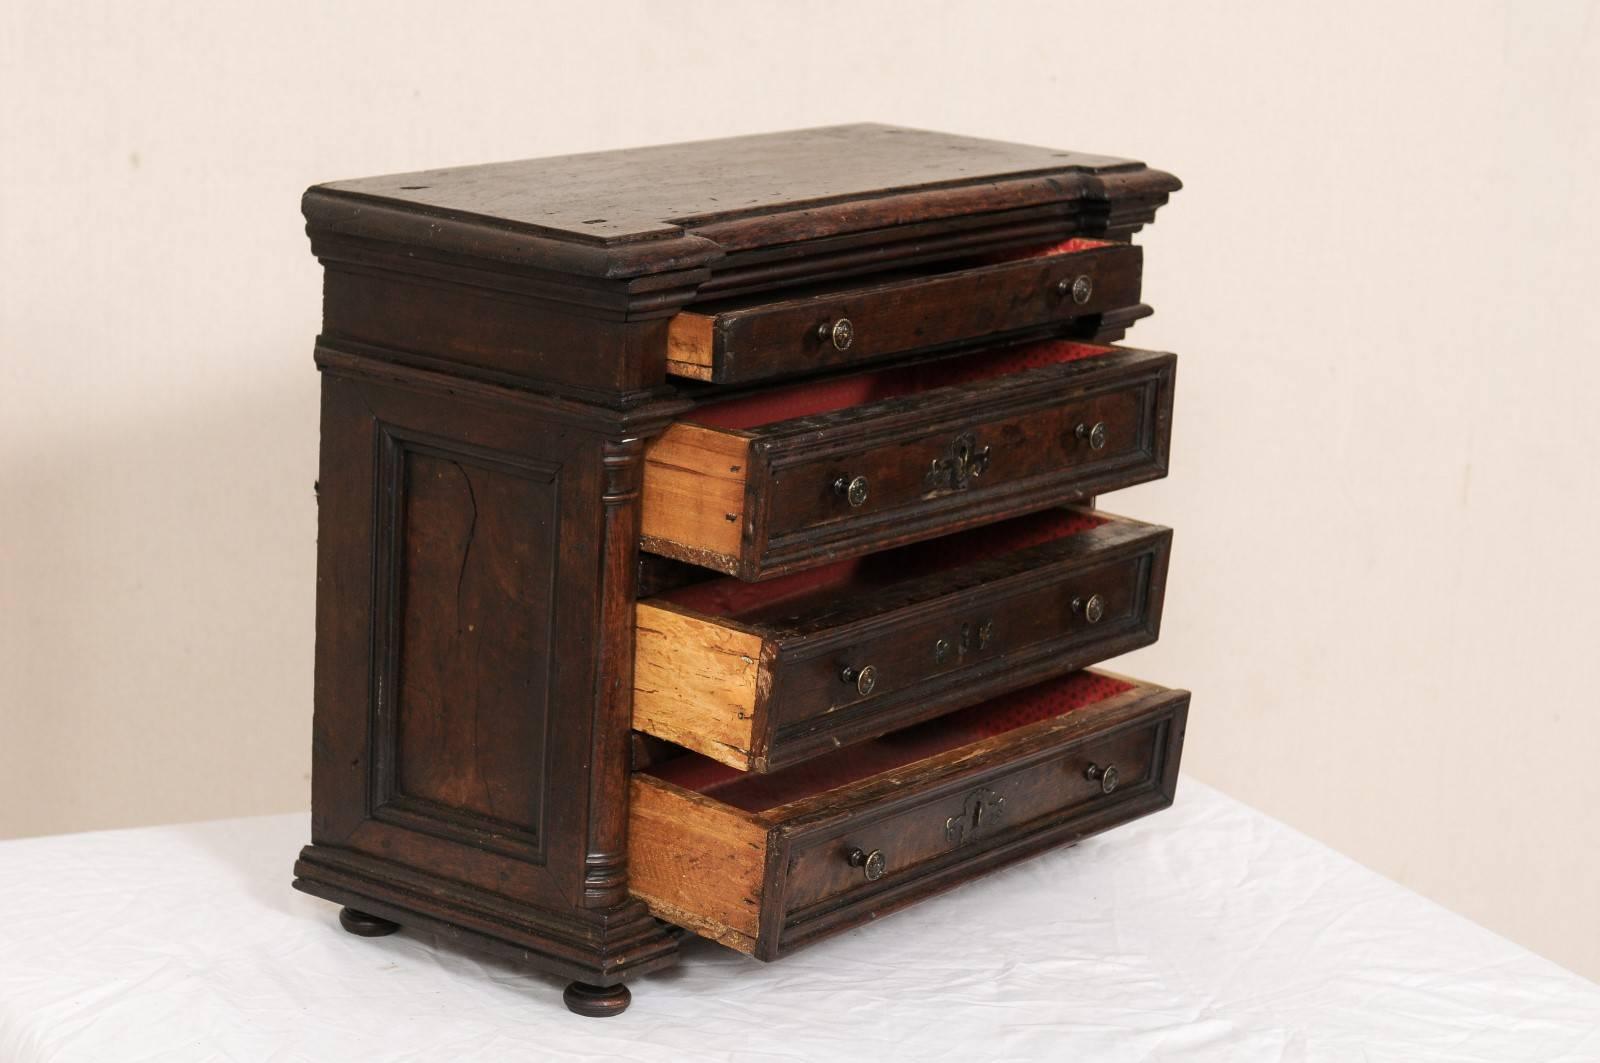 Wood Italian Early 18th Century Petite-Sized Walnut Chest w/Drawers for Table-Top  For Sale